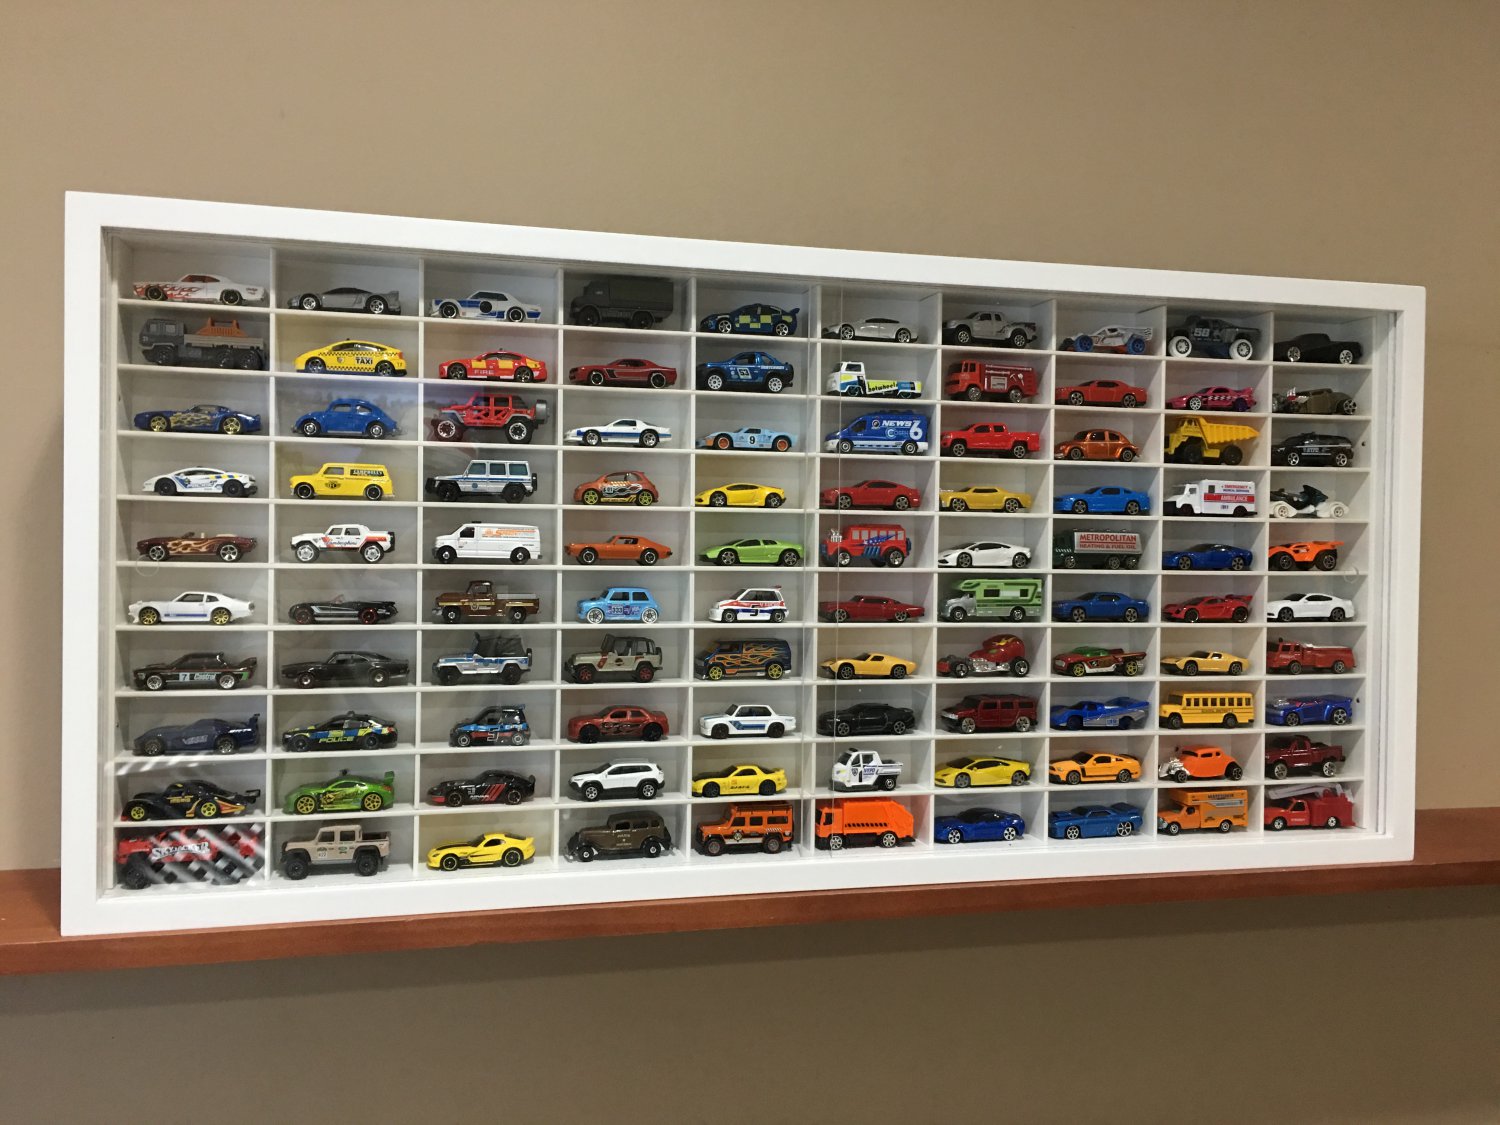 Display case cabinet for 1/64 diecast scale cars (hot wheels, matchbox) - 1...